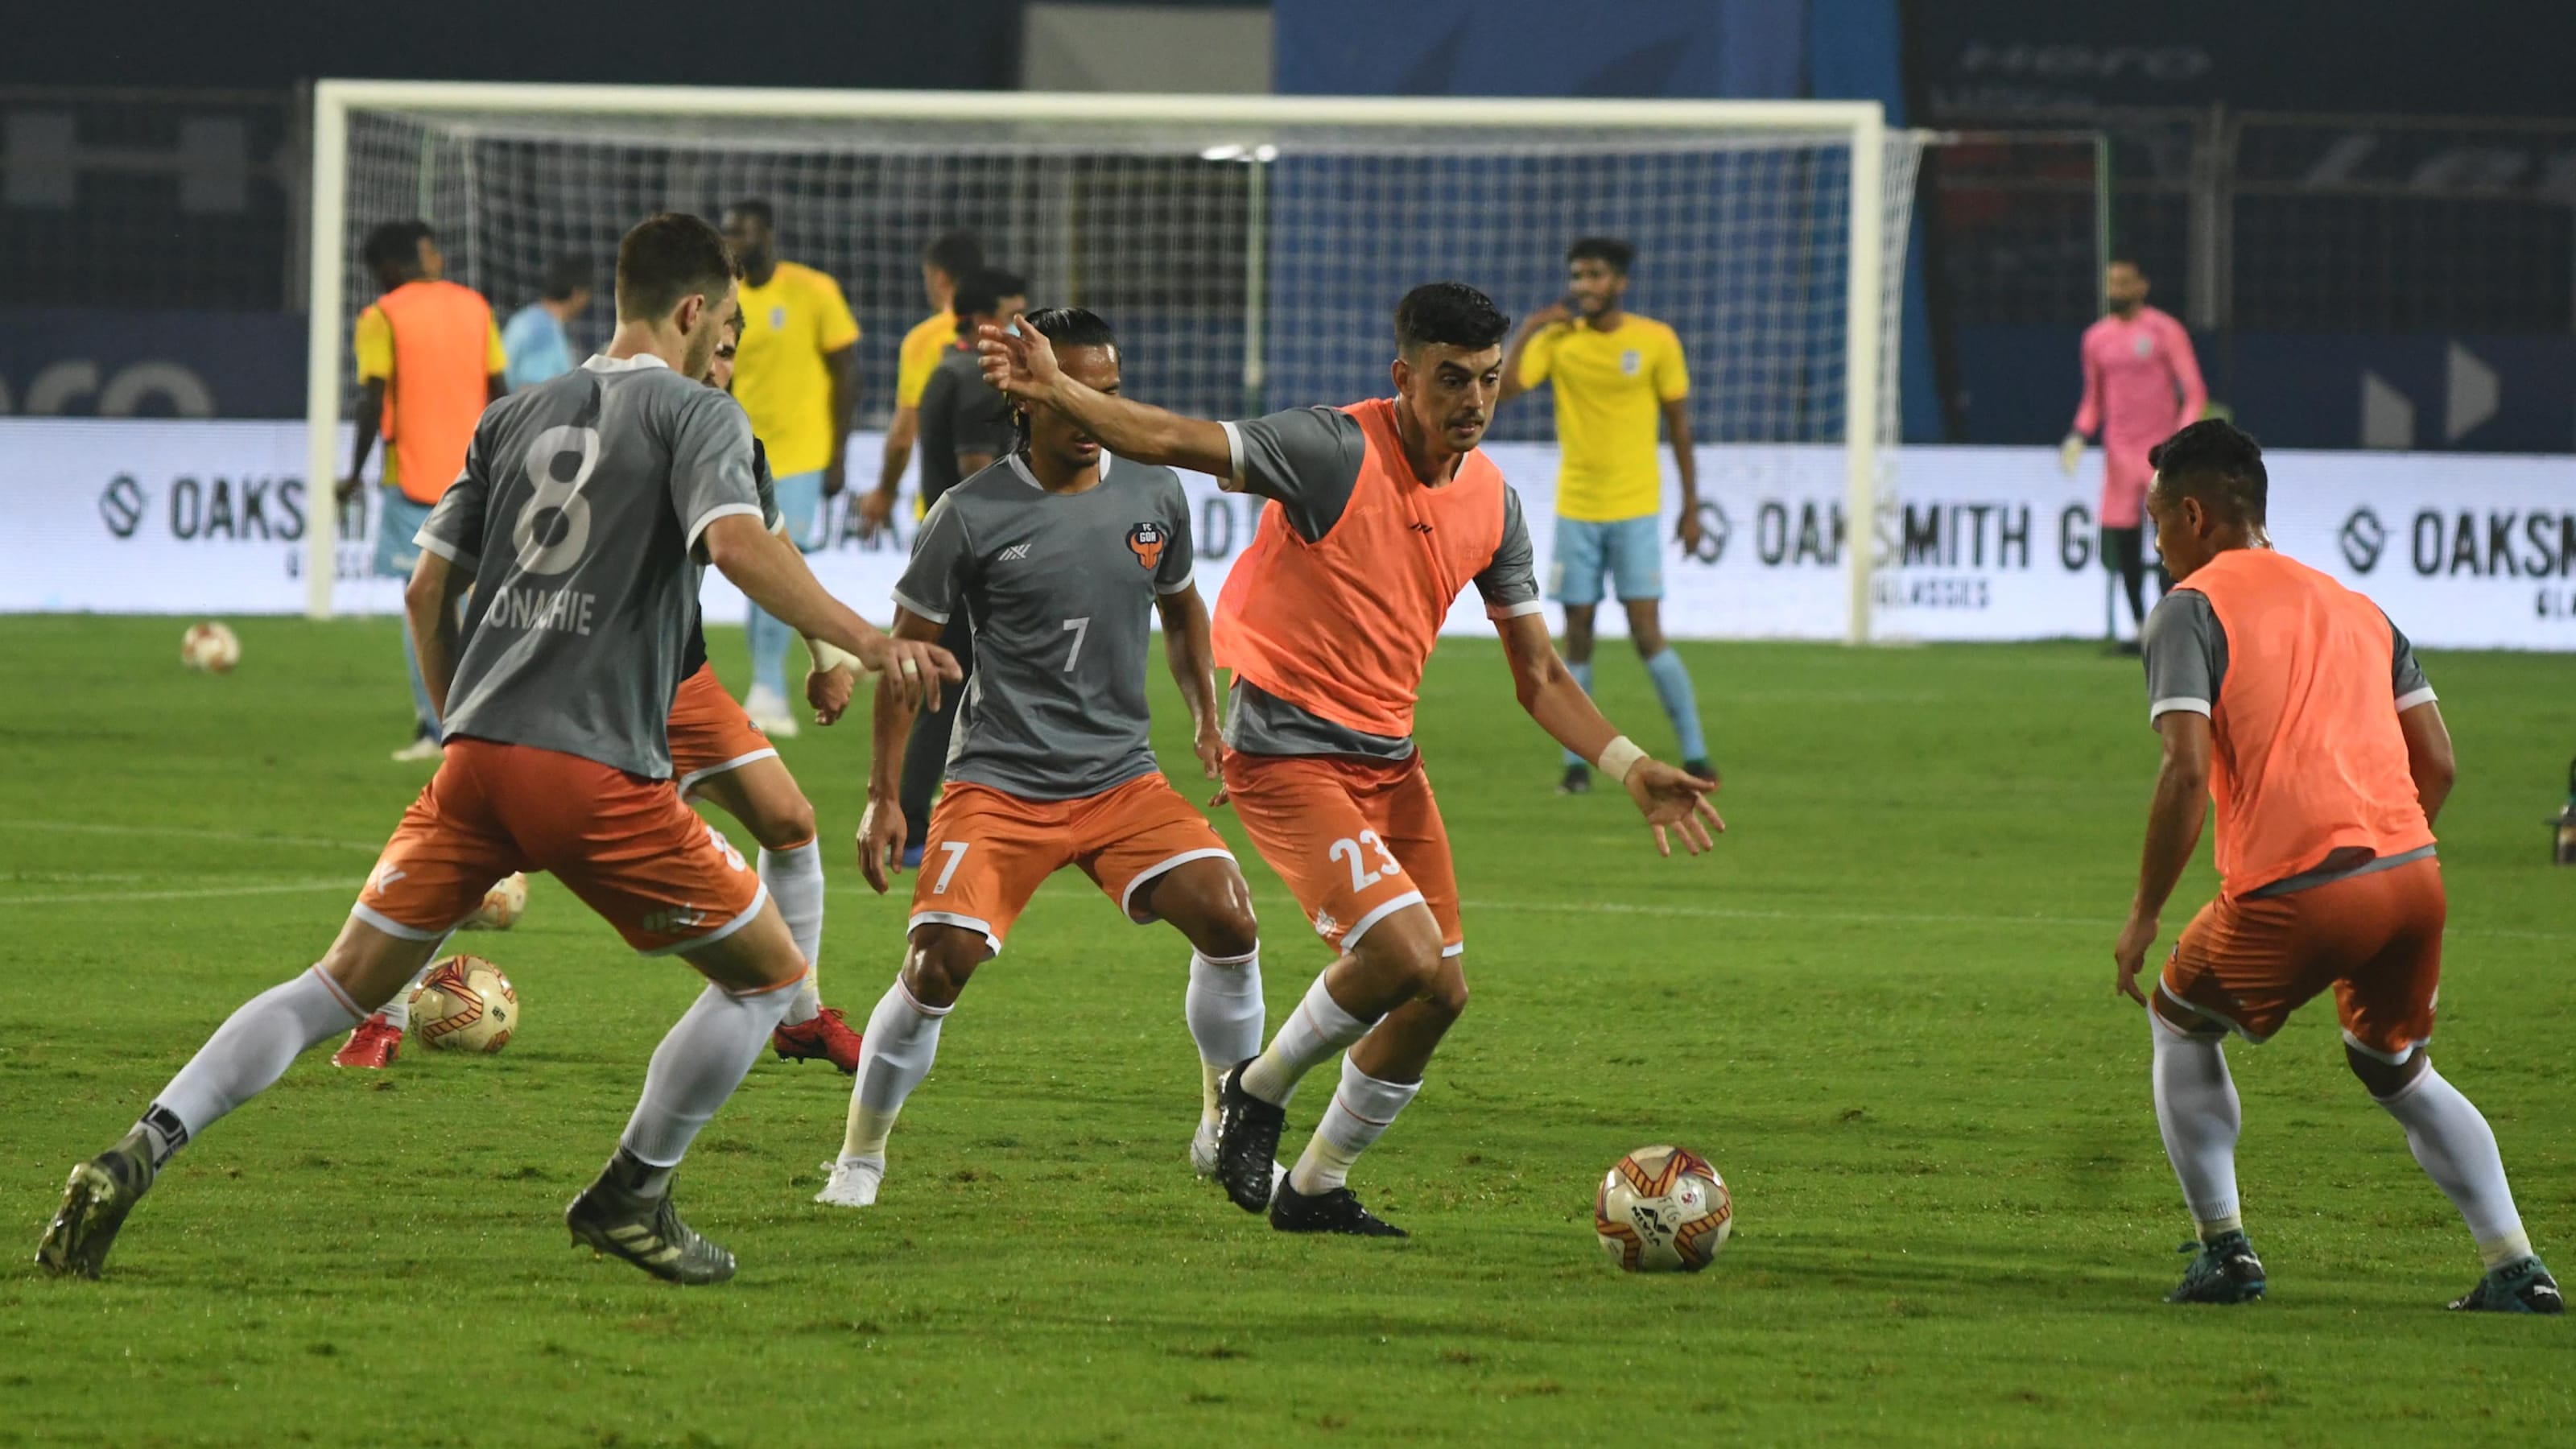 Afc Champions League 21 Get Fc Goa Fixtures And Know Where To Watch Live Streaming And Telecast In India